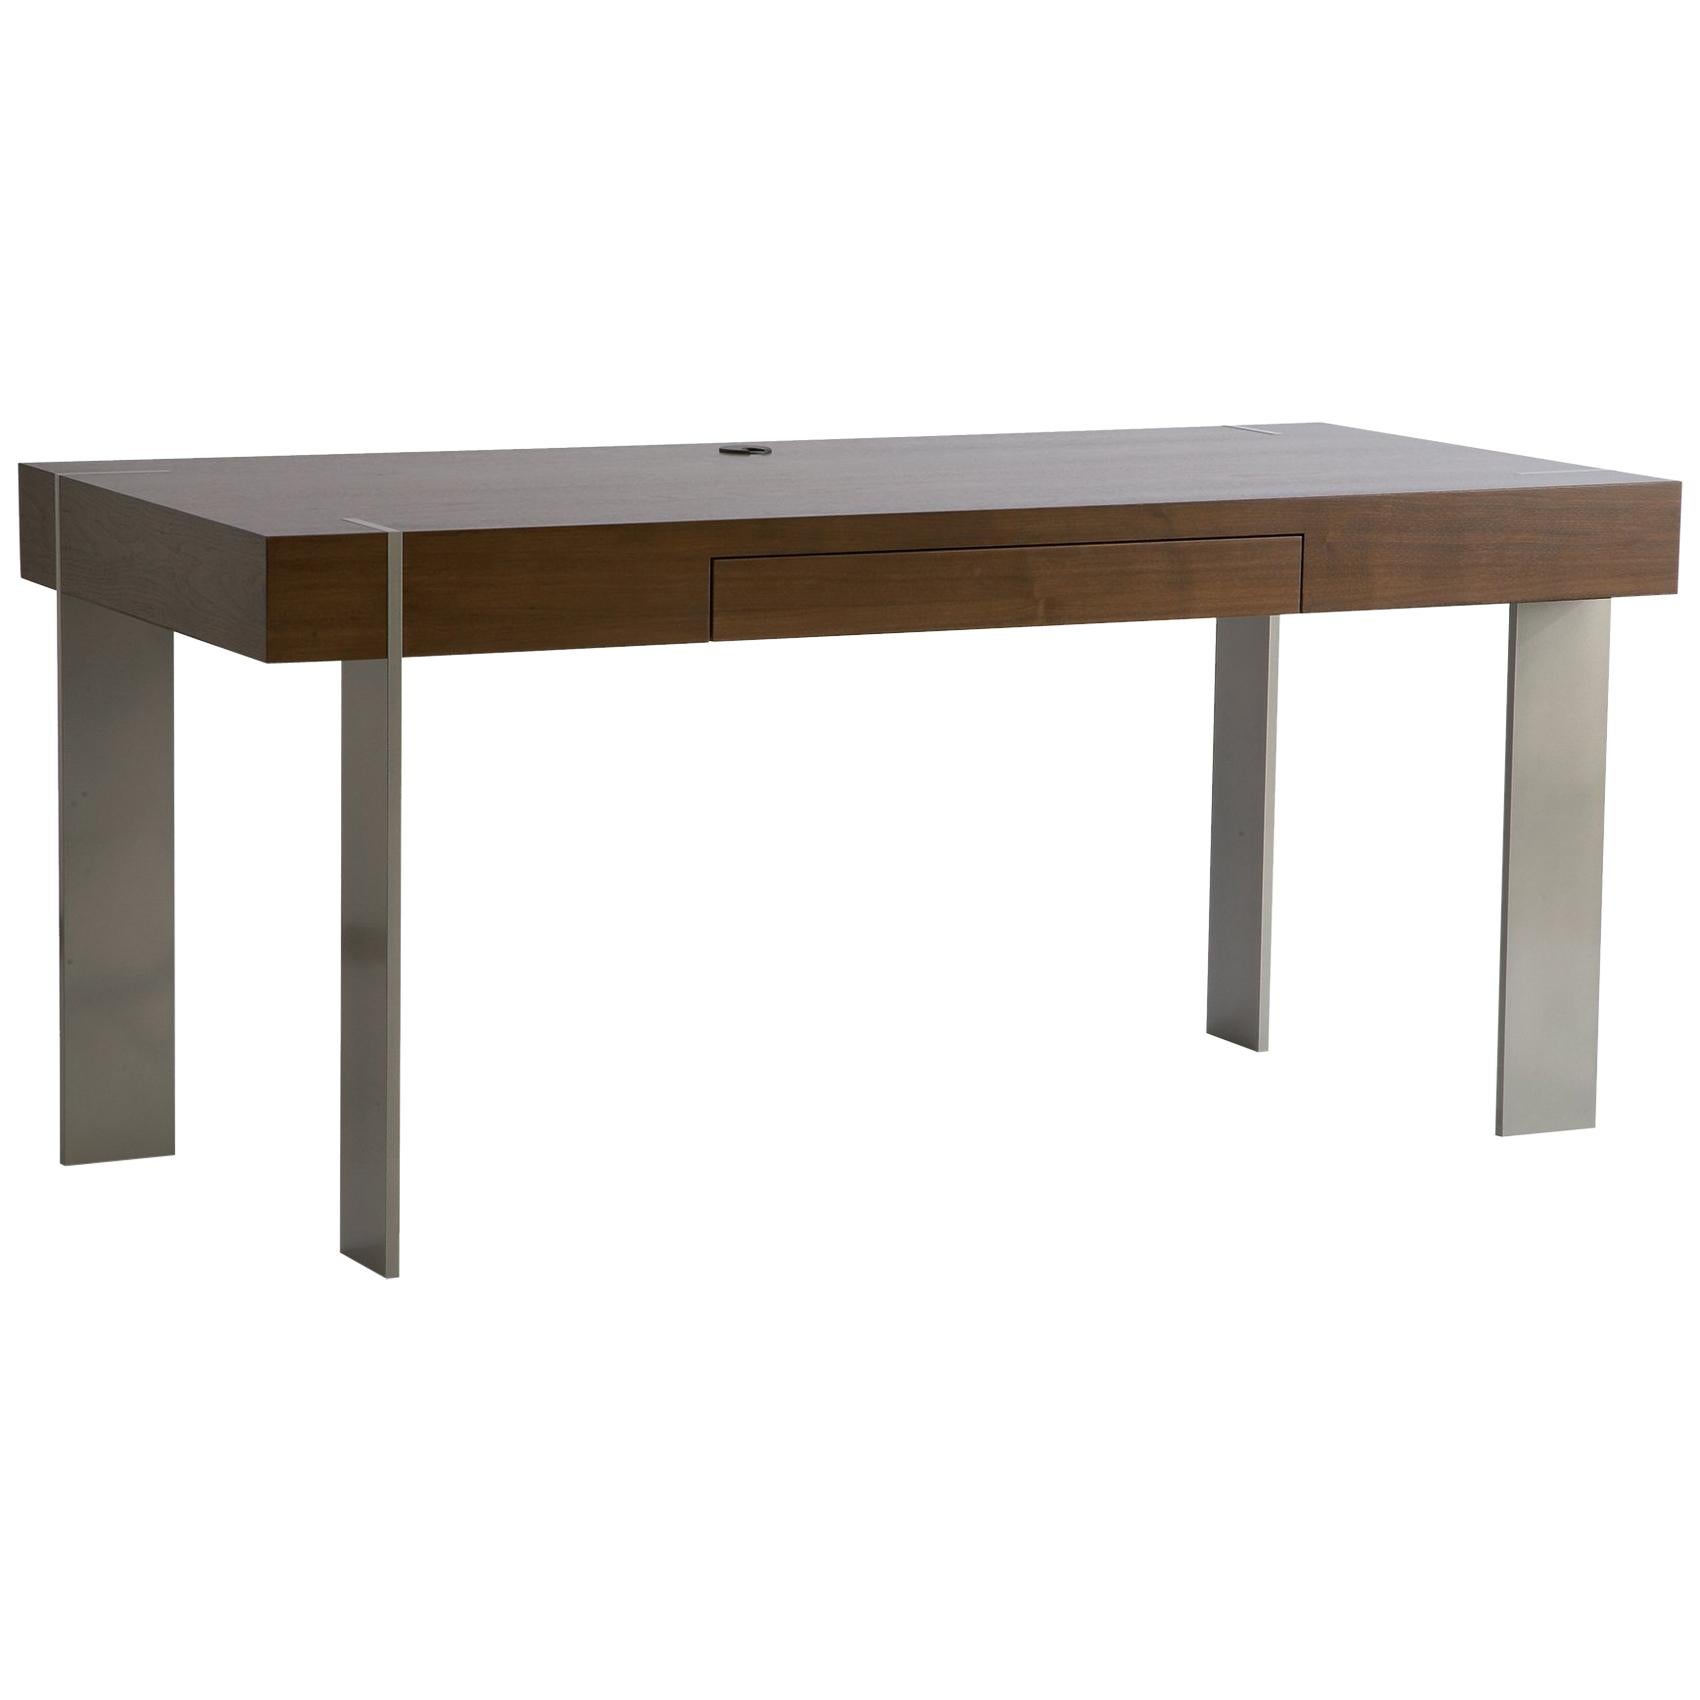 DK-21 Desk with Metal Legs by Antoine Proulx For Sale